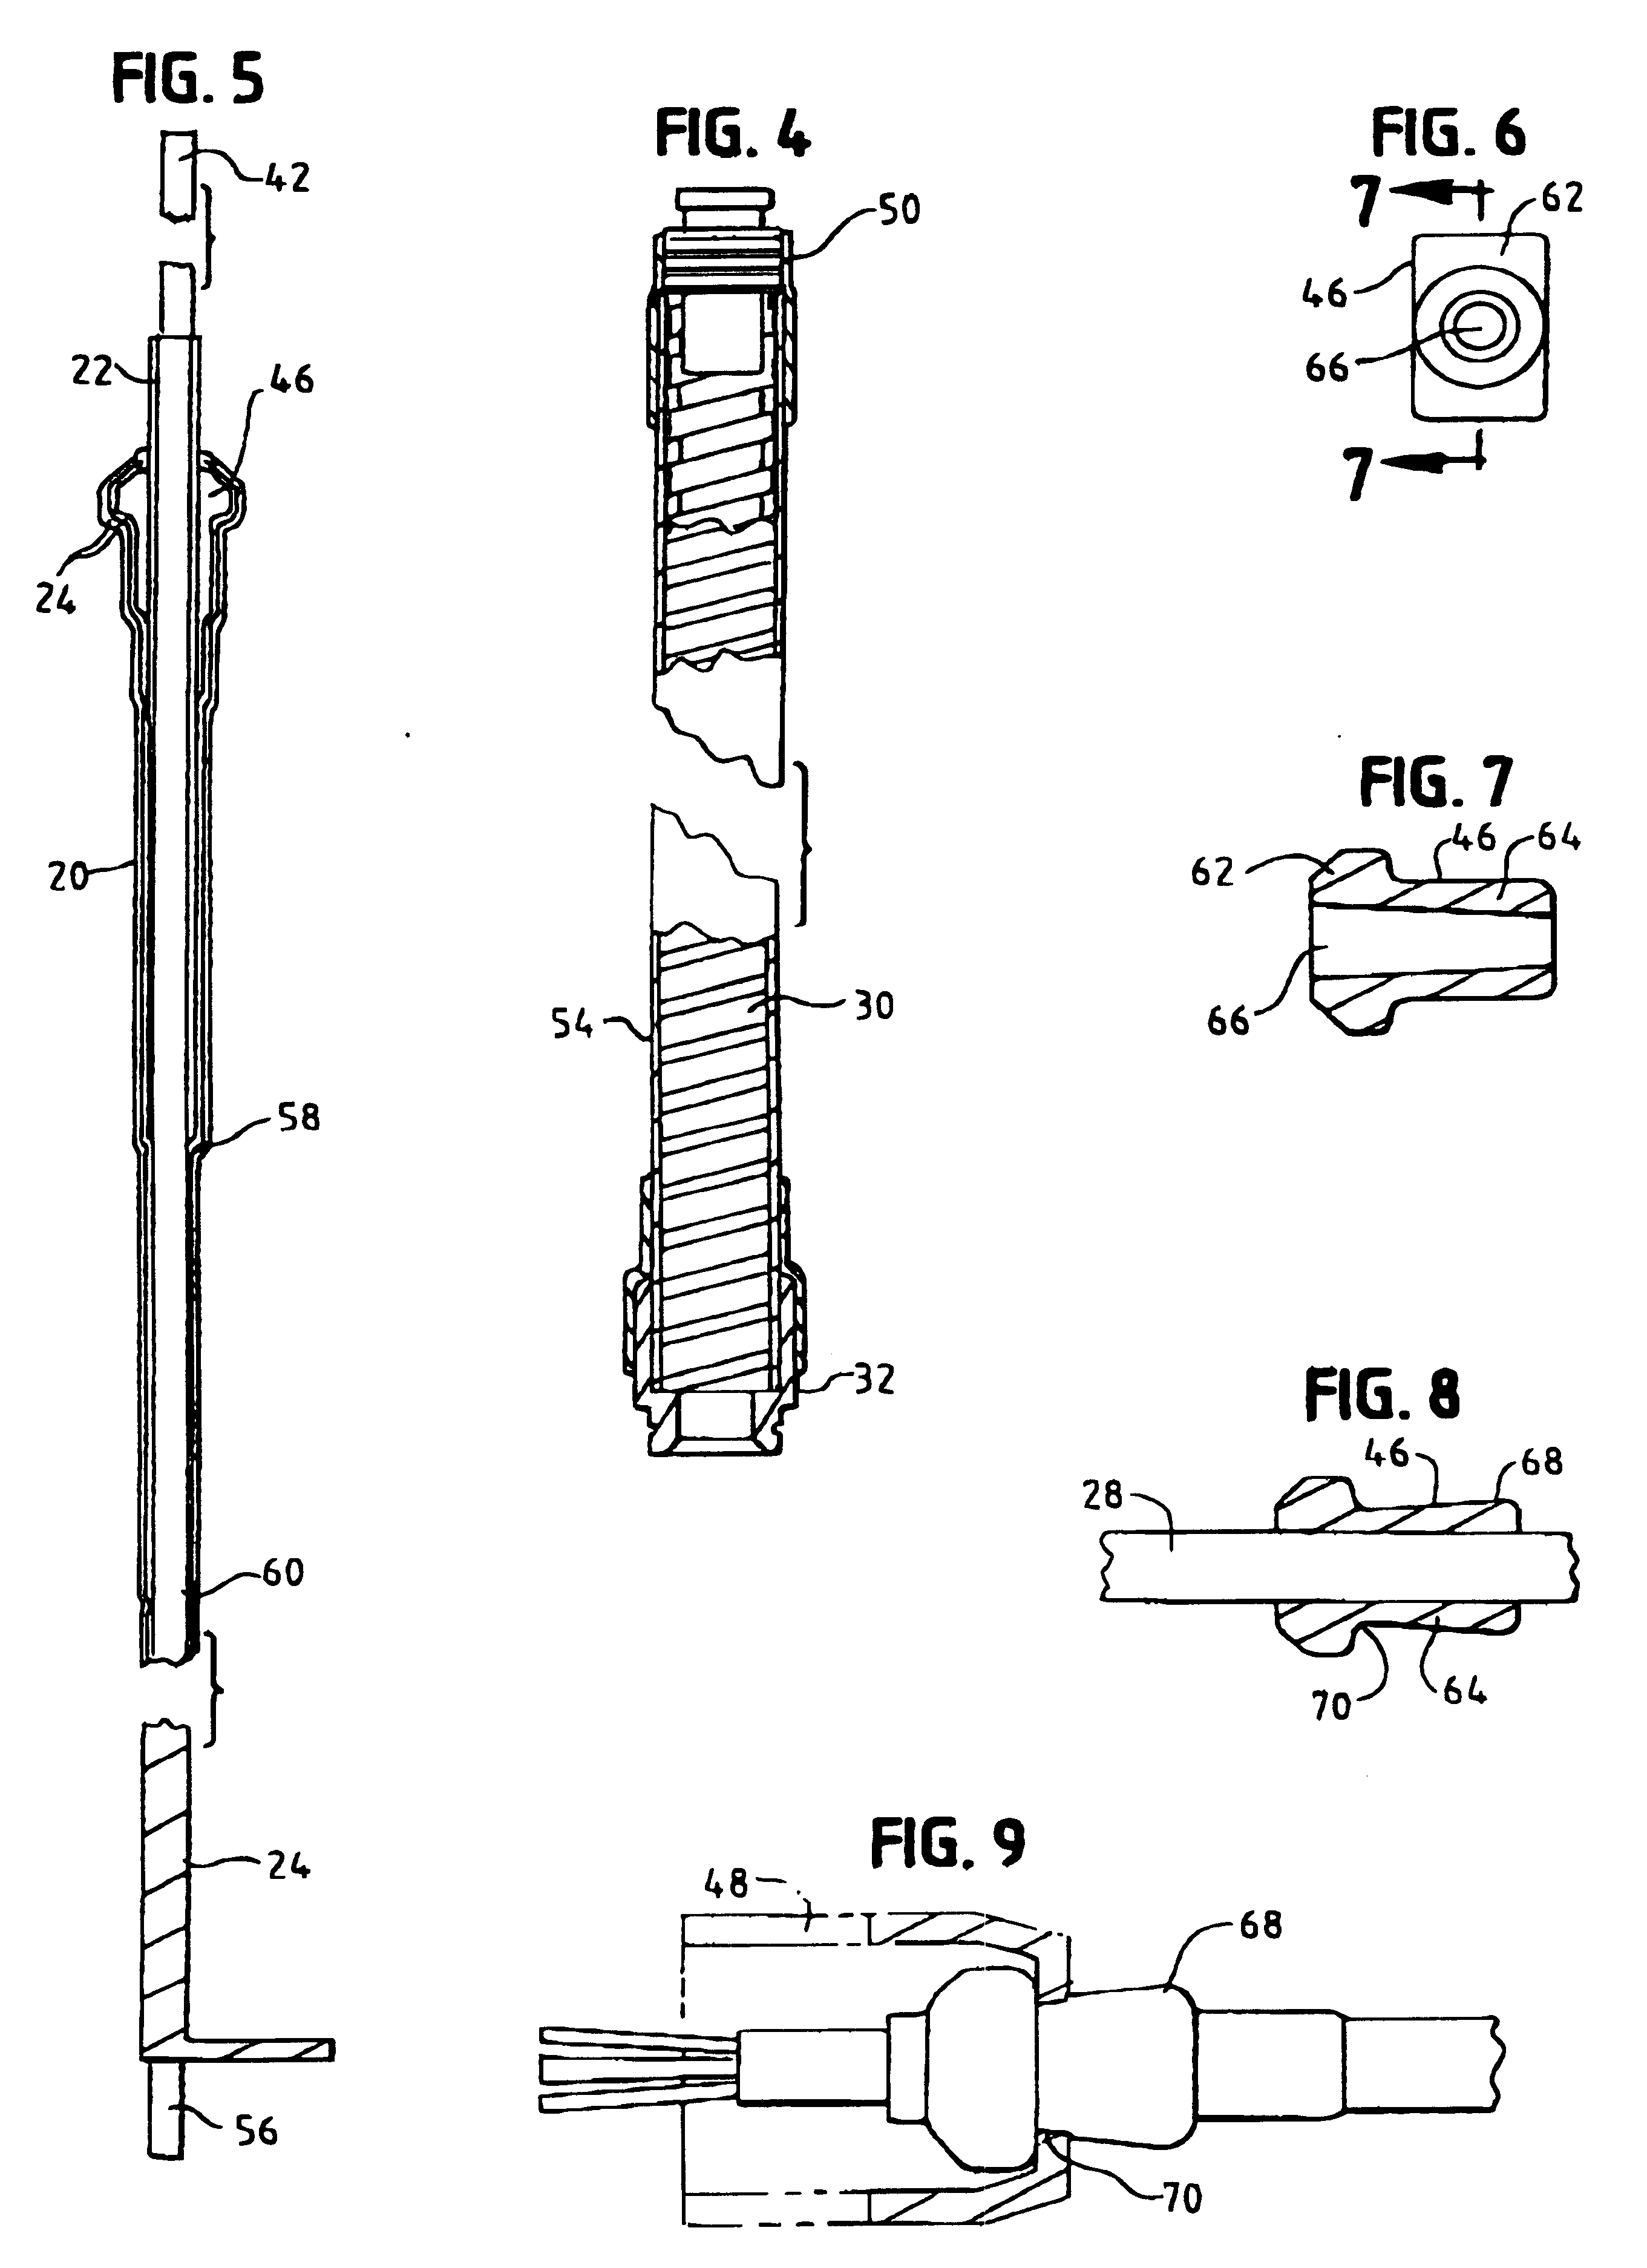 Retractable cord assembly